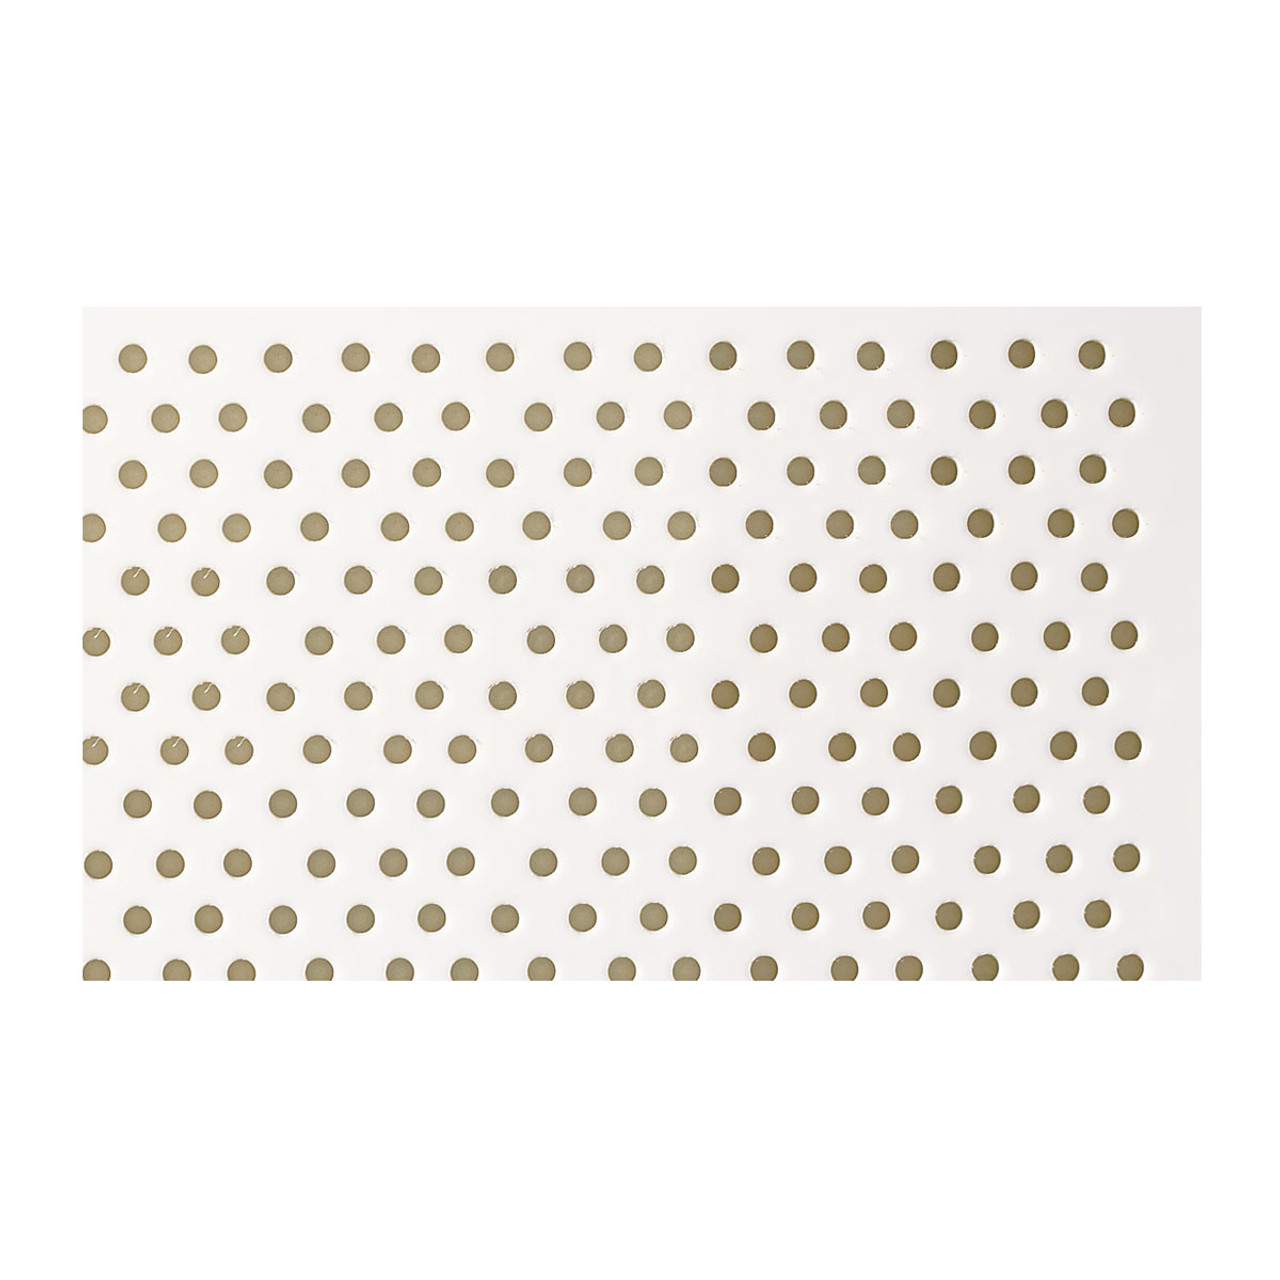 Orfit¨ Natural NS Soft, 18" x 24" x 1/8", maxi perforated 25%